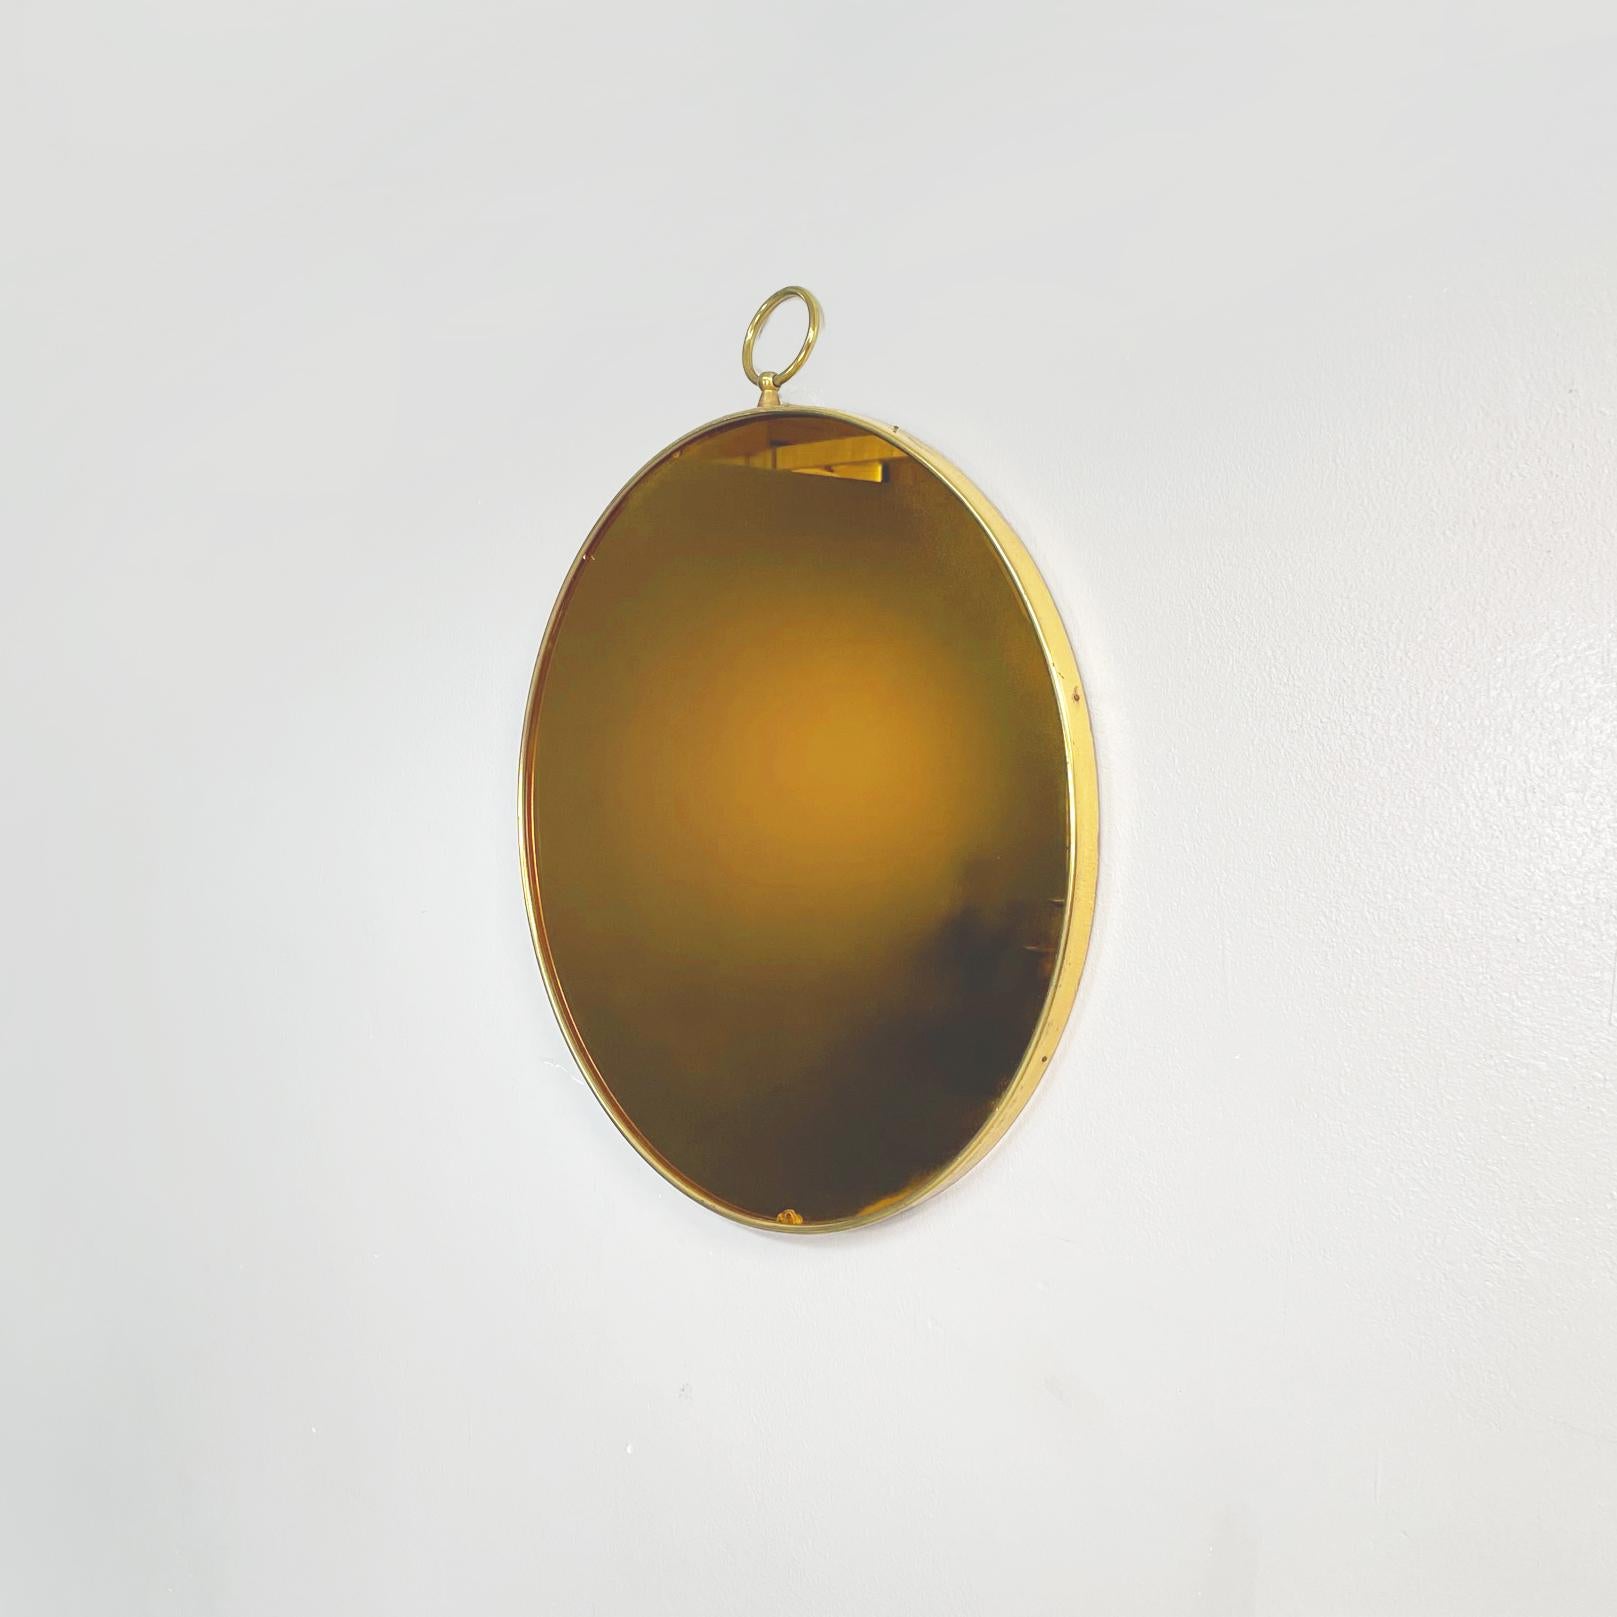 Italian mid-century Round brass mirror by Piero Fornasetti, 1960s
Round brass wall mirror. 
The mirror is original of the period and its  fantastic with gilded color, and the frame in brass conserve the original design of Fornasetti with the